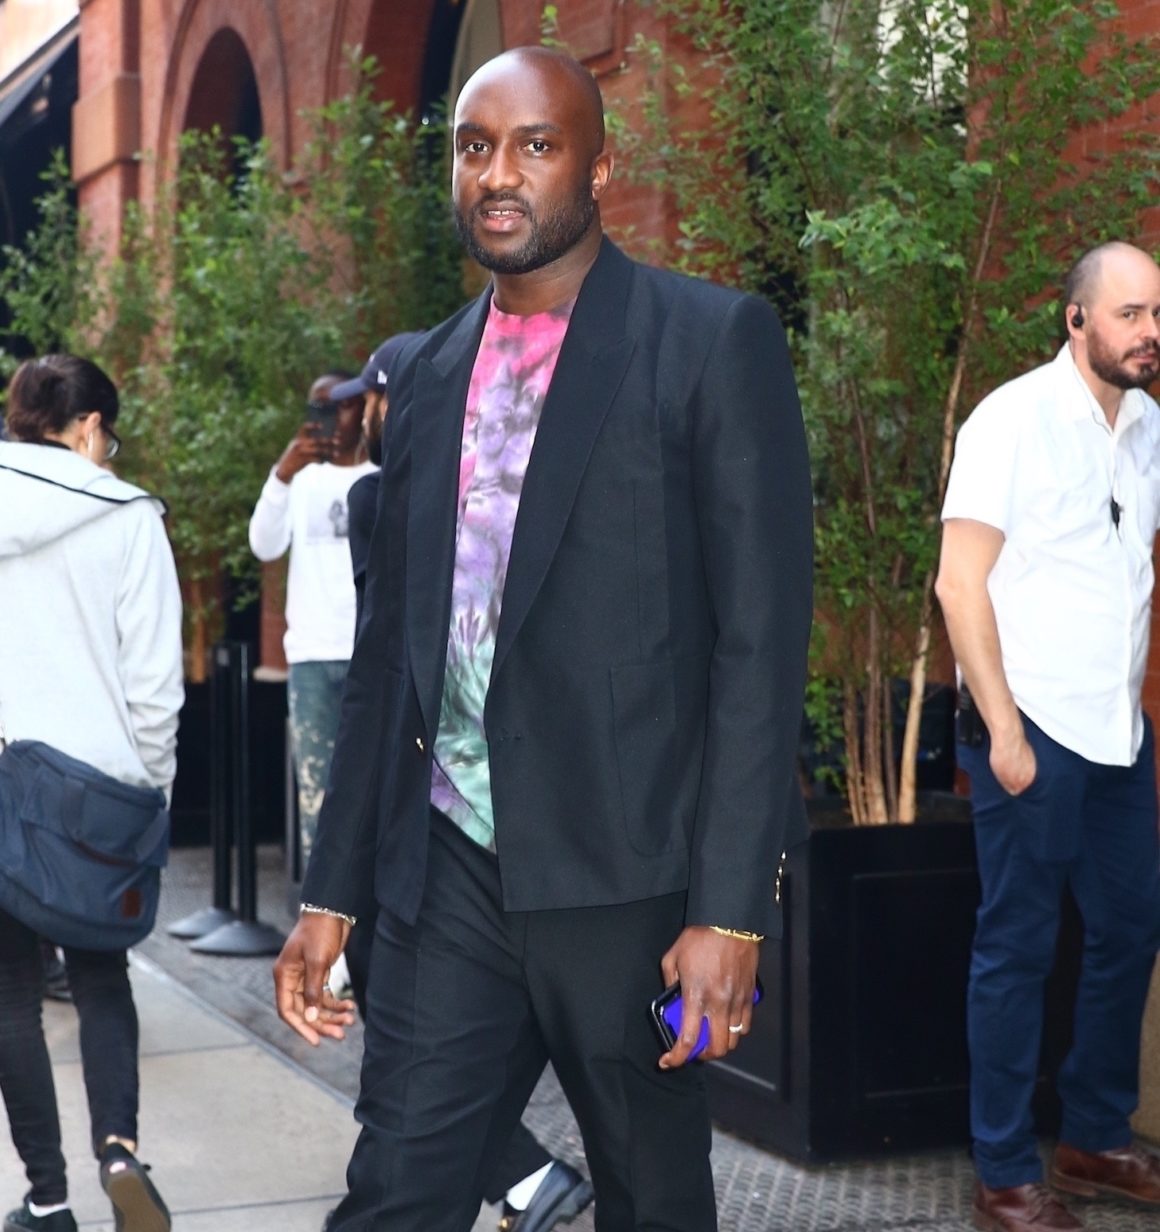 Virgil Abloh is being boycotted because he's a copycat — and Black?